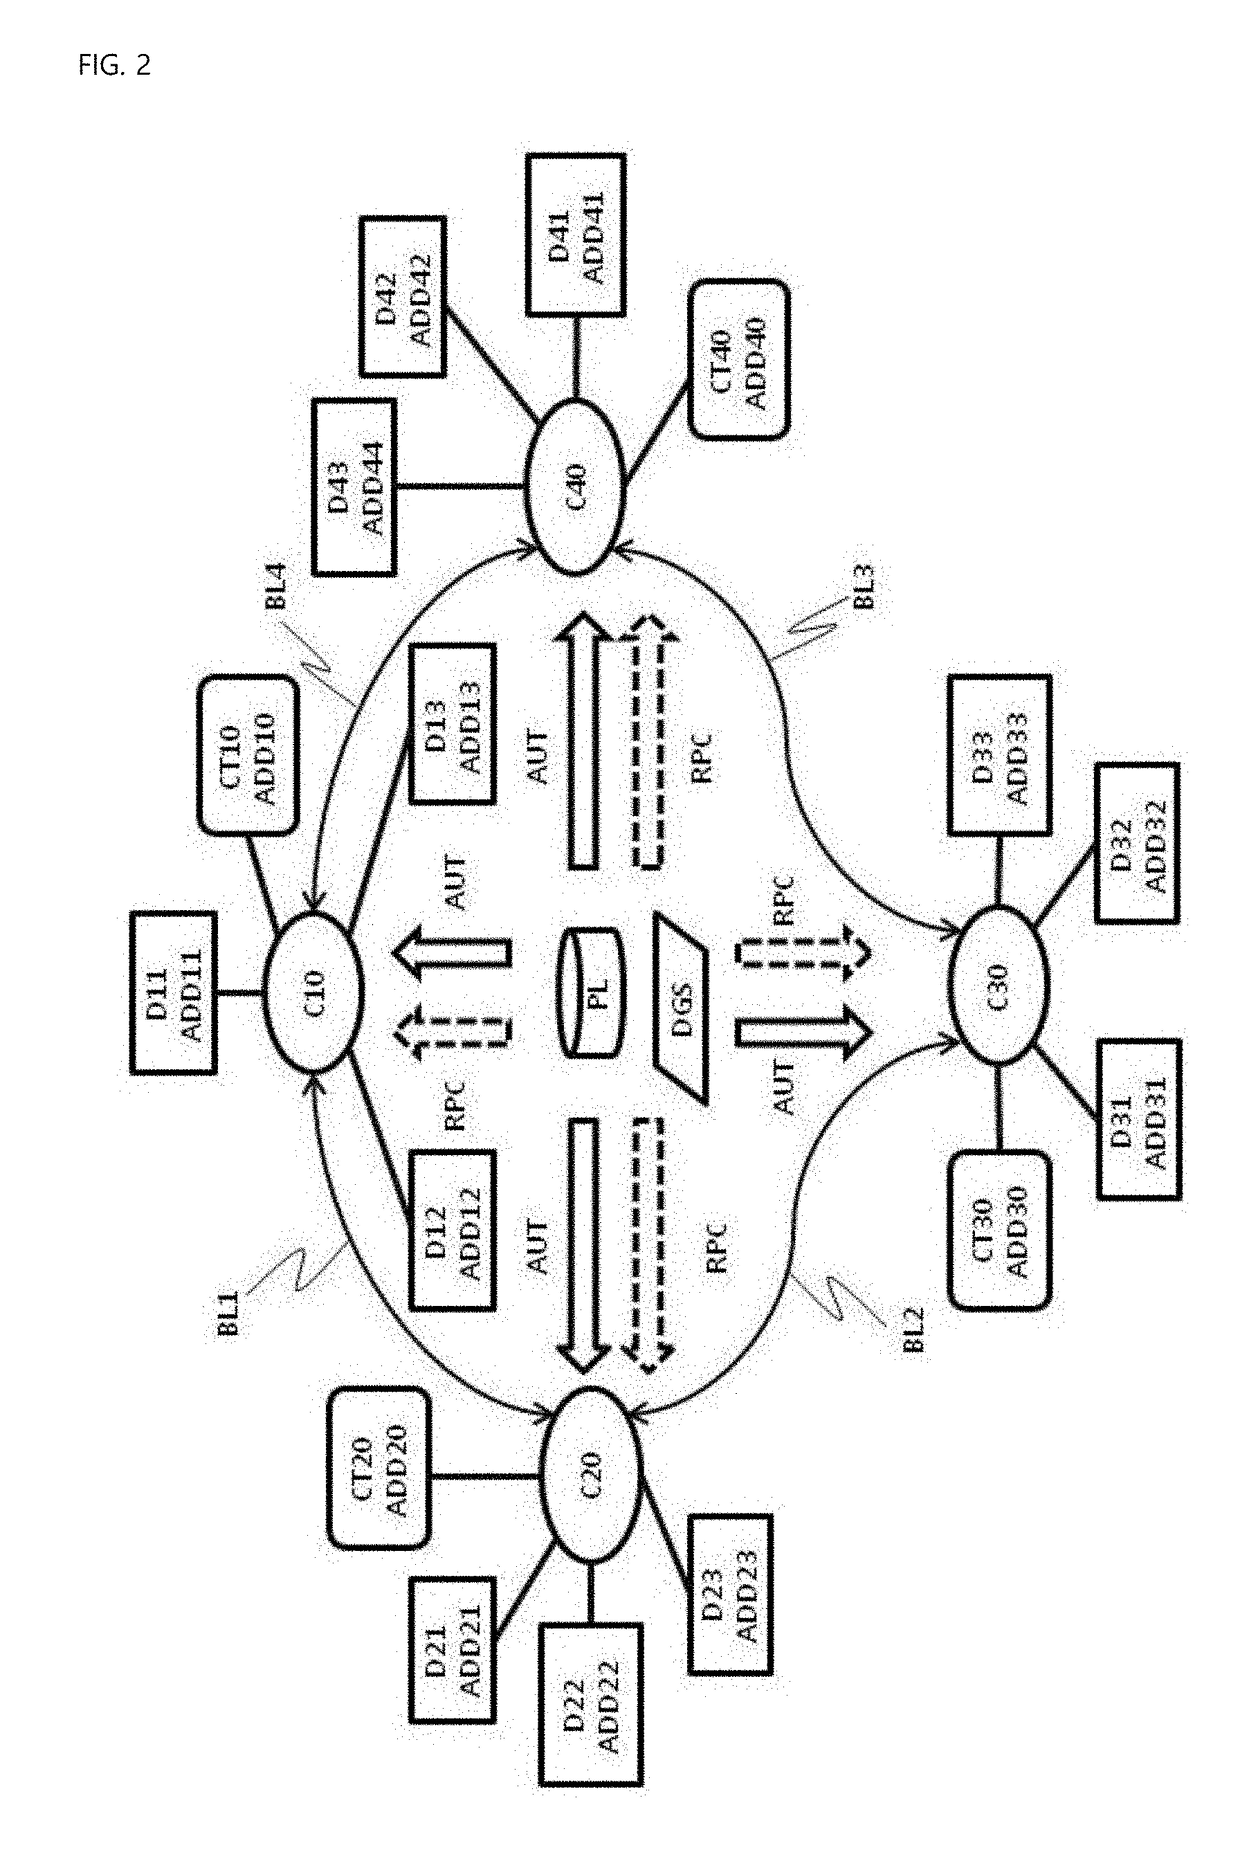 Iot-based things management system and method using block-chain authentication